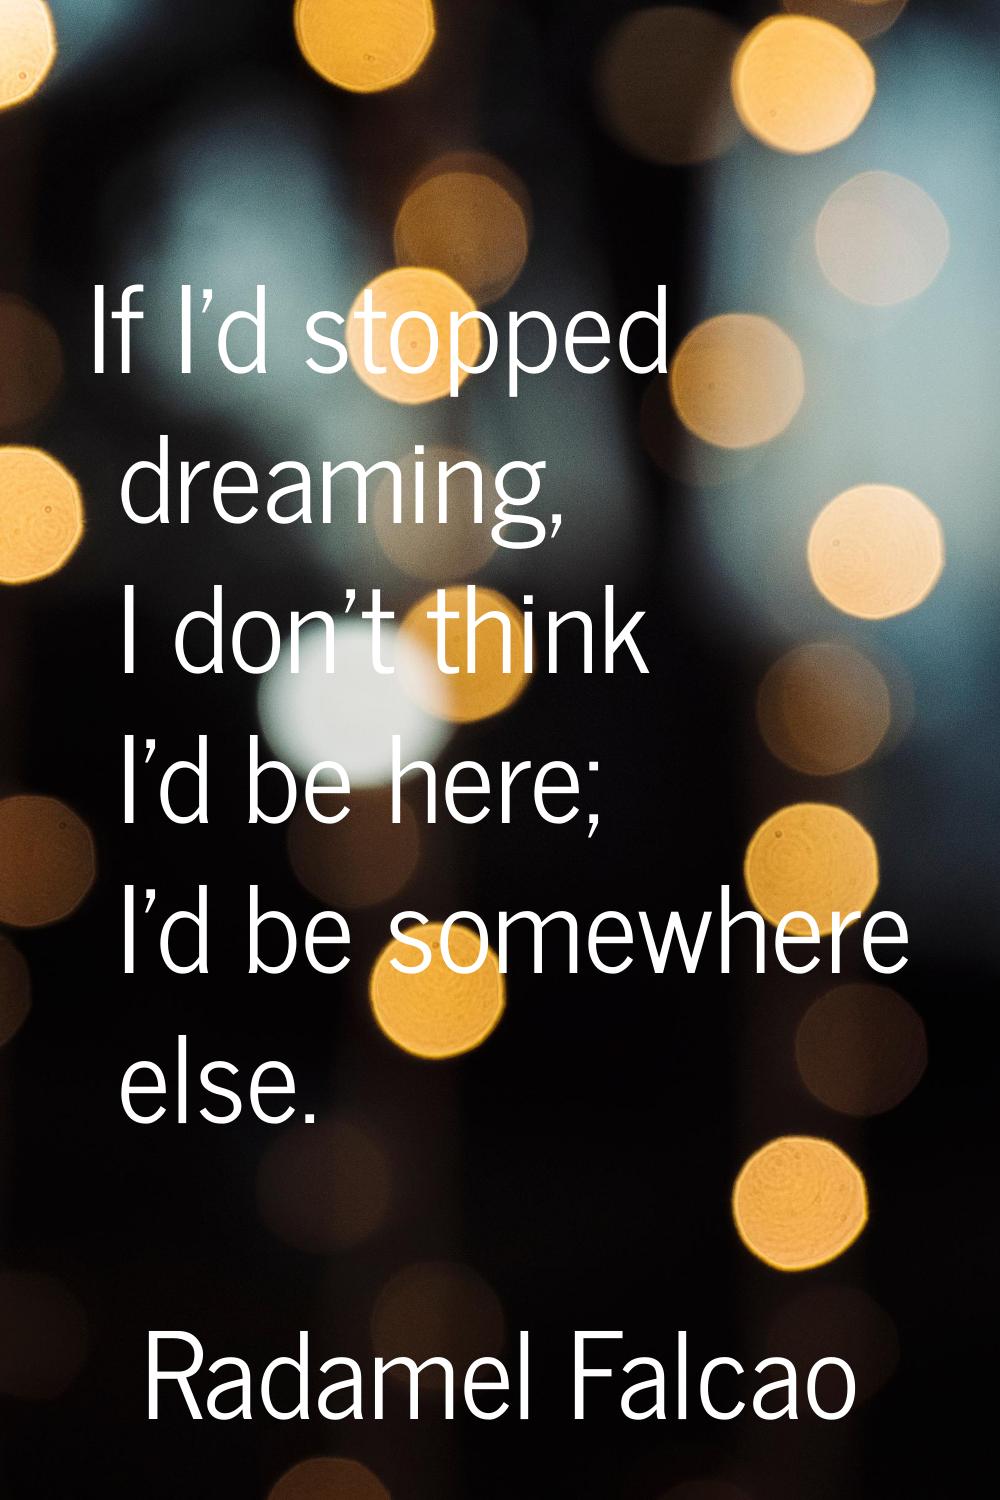 If I'd stopped dreaming, I don't think I'd be here; I'd be somewhere else.